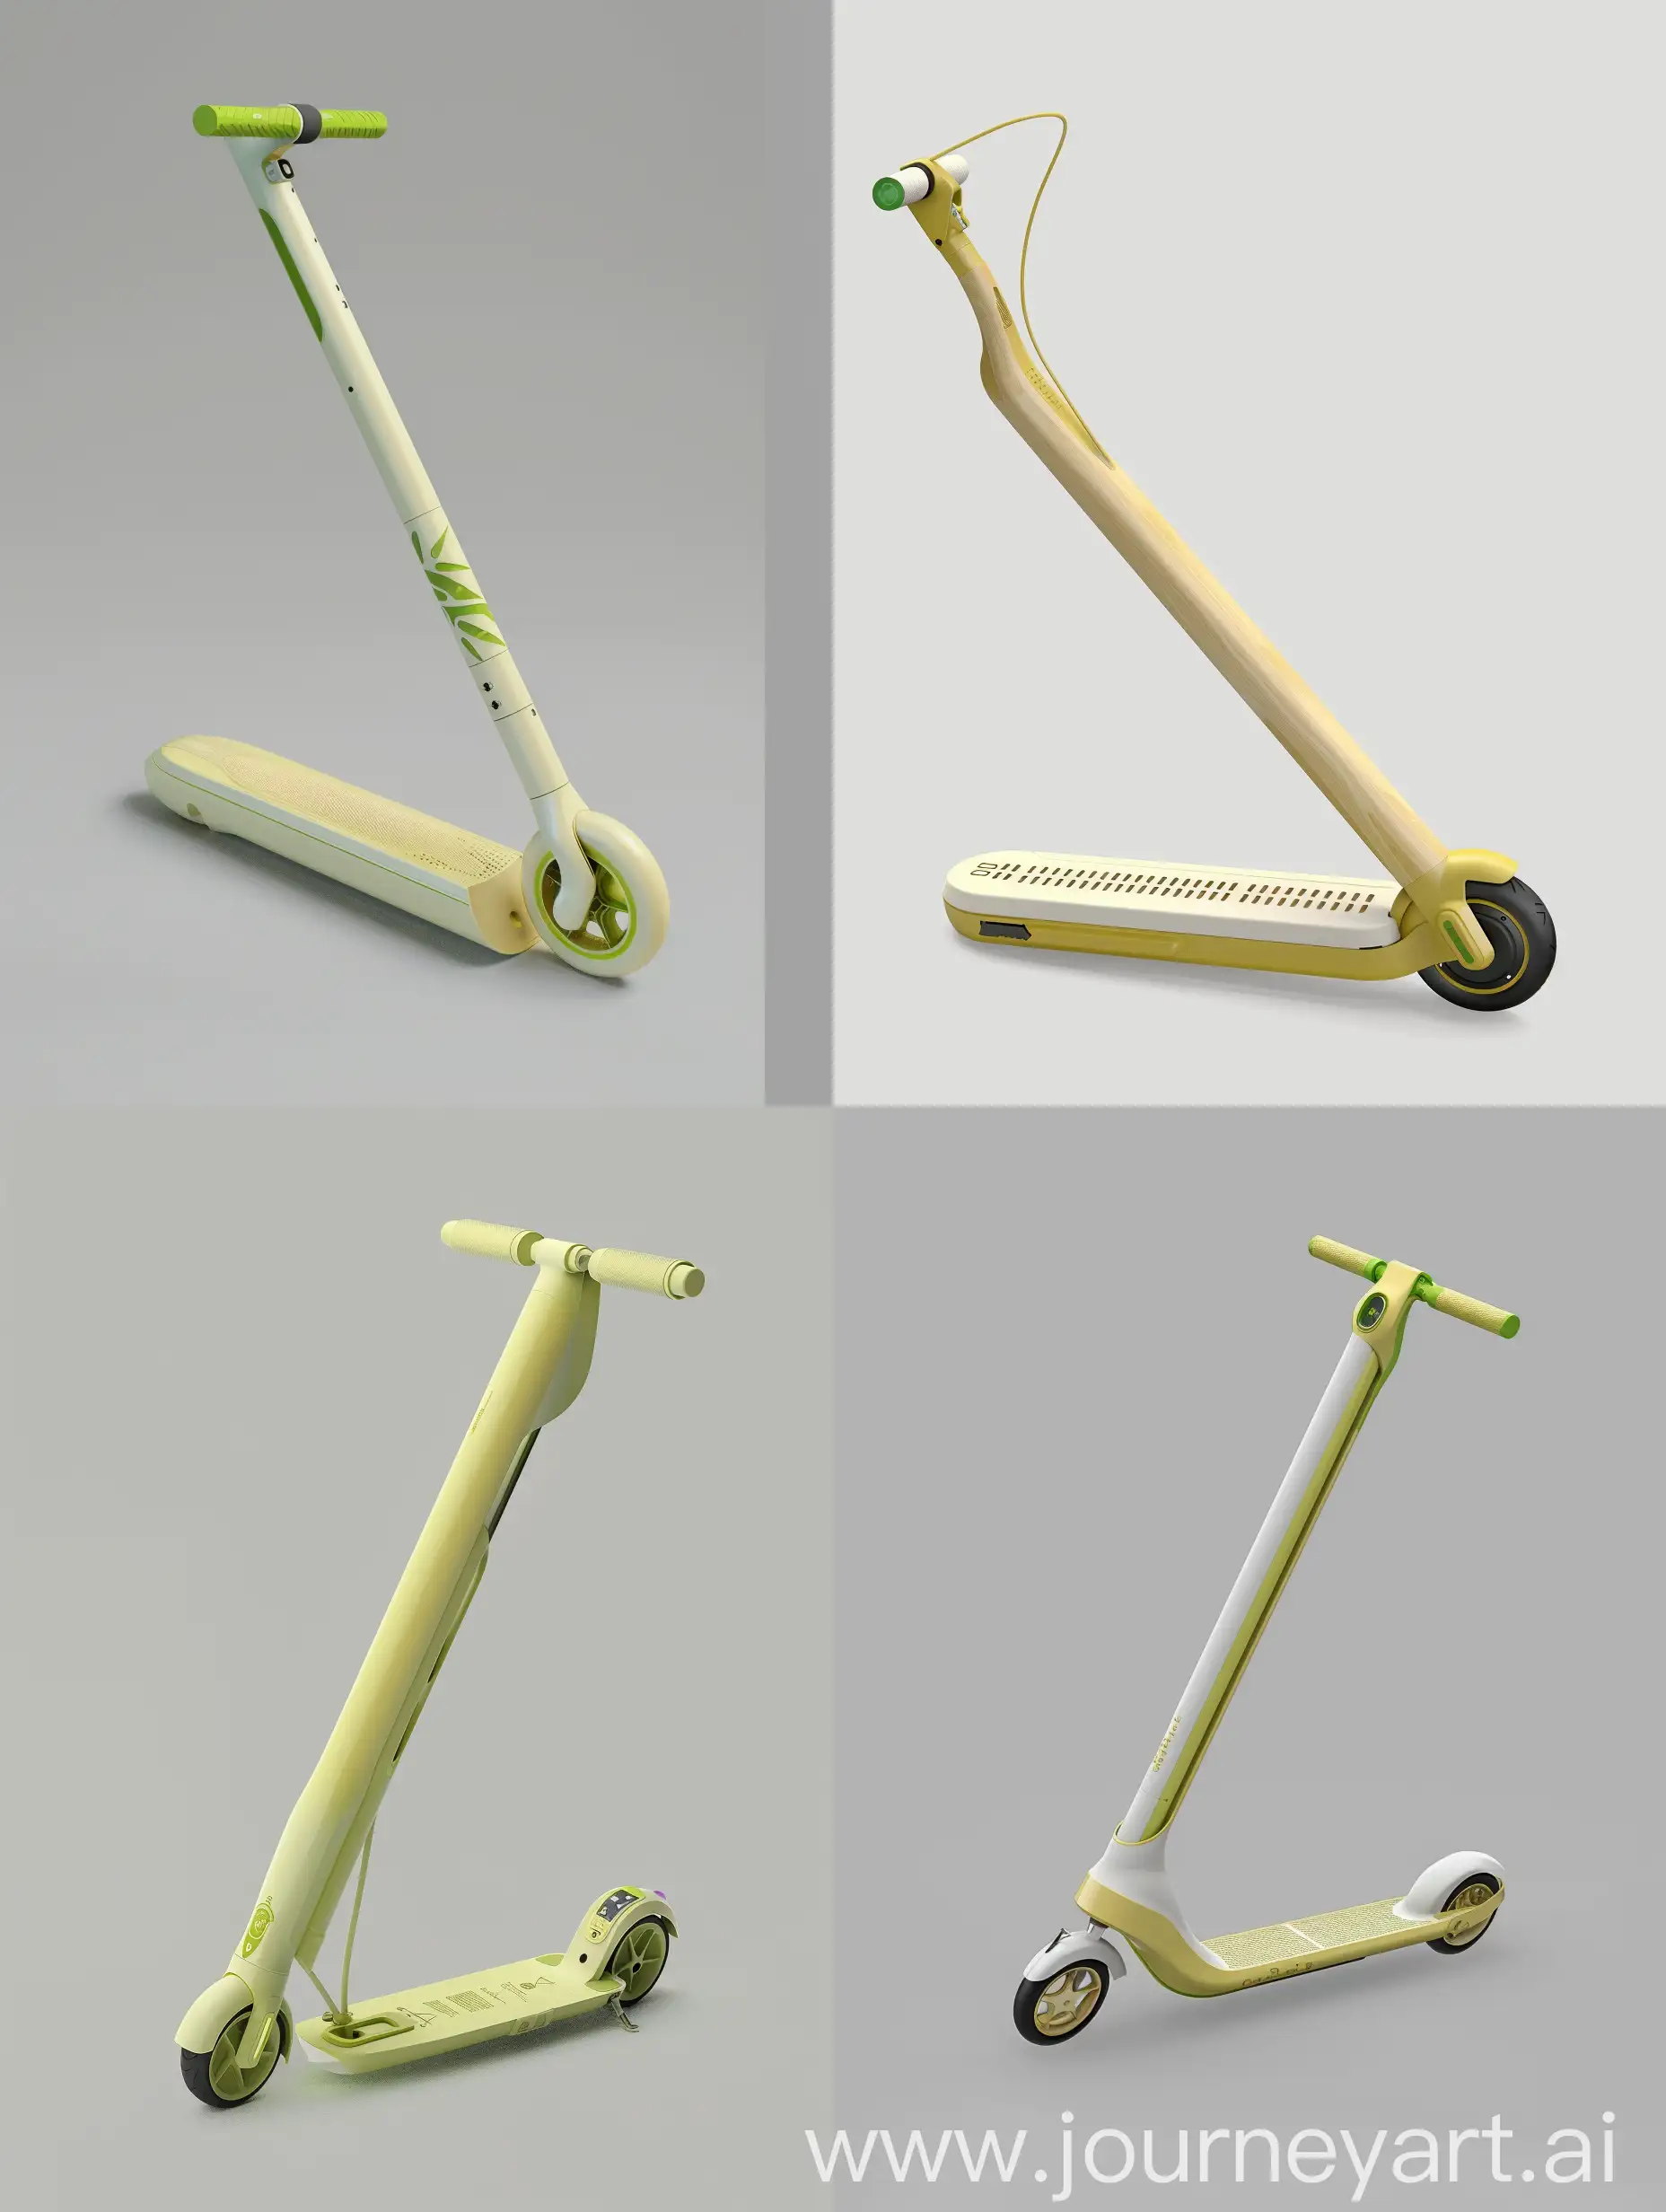 Futuristic-Foldable-EcoFriendly-Adult-Size-Electric-Scooter-Inspired-by-Bamboo